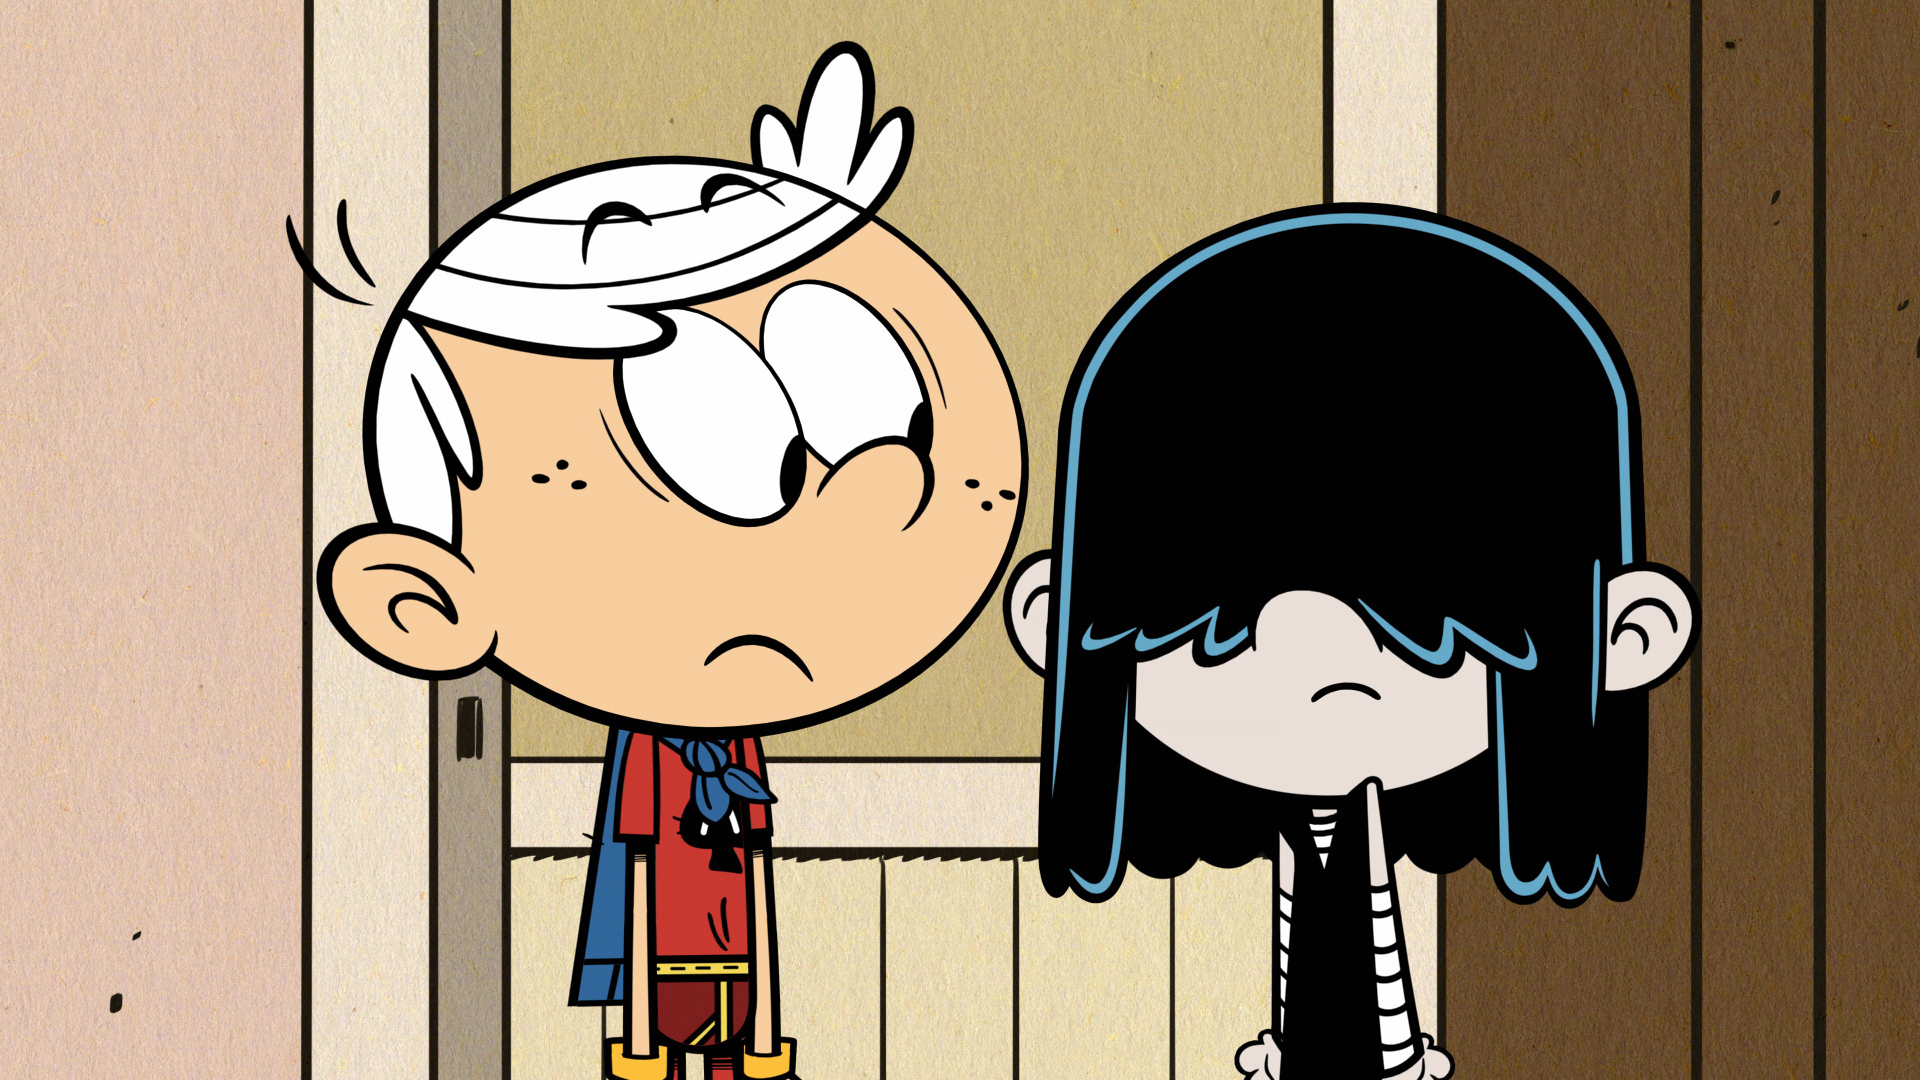 The loud house hand me downer